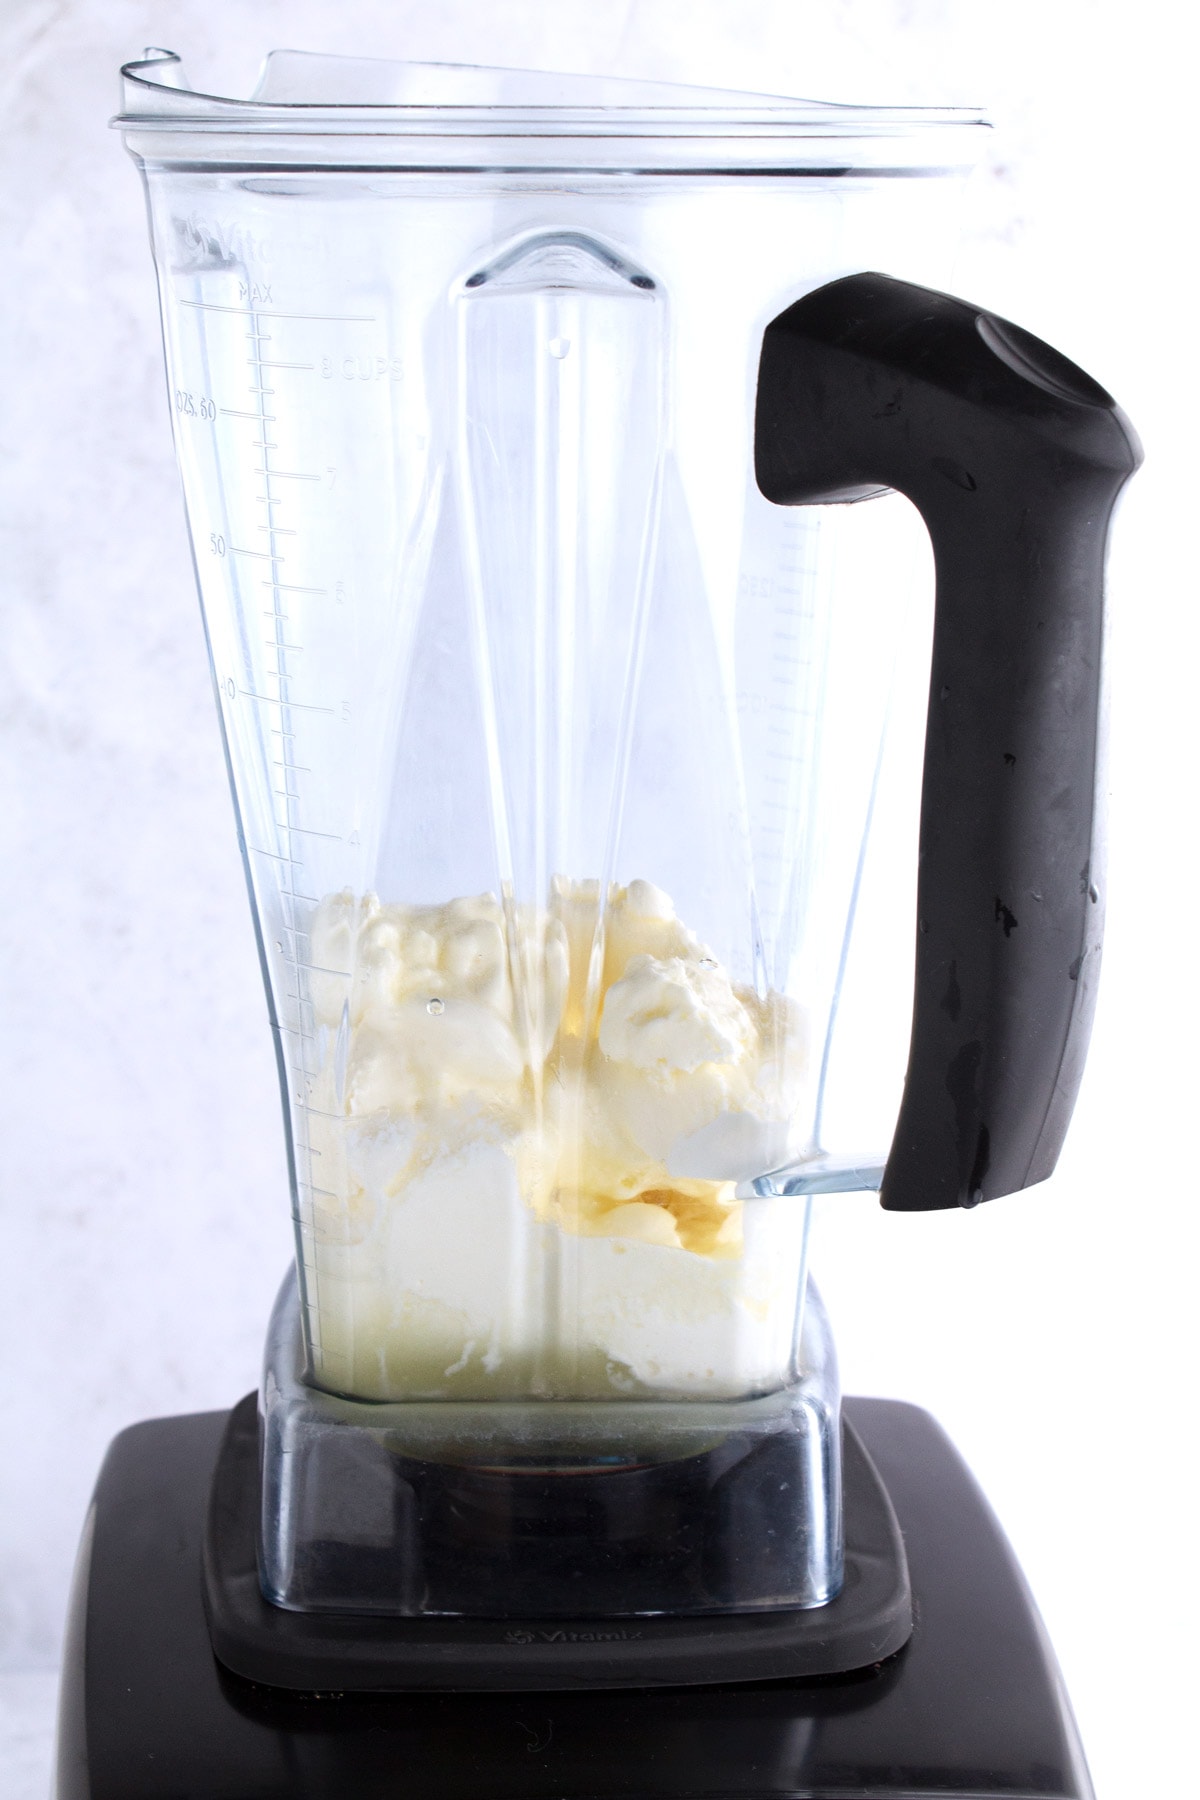 Blender with un-mixed ice cream and lemonade.